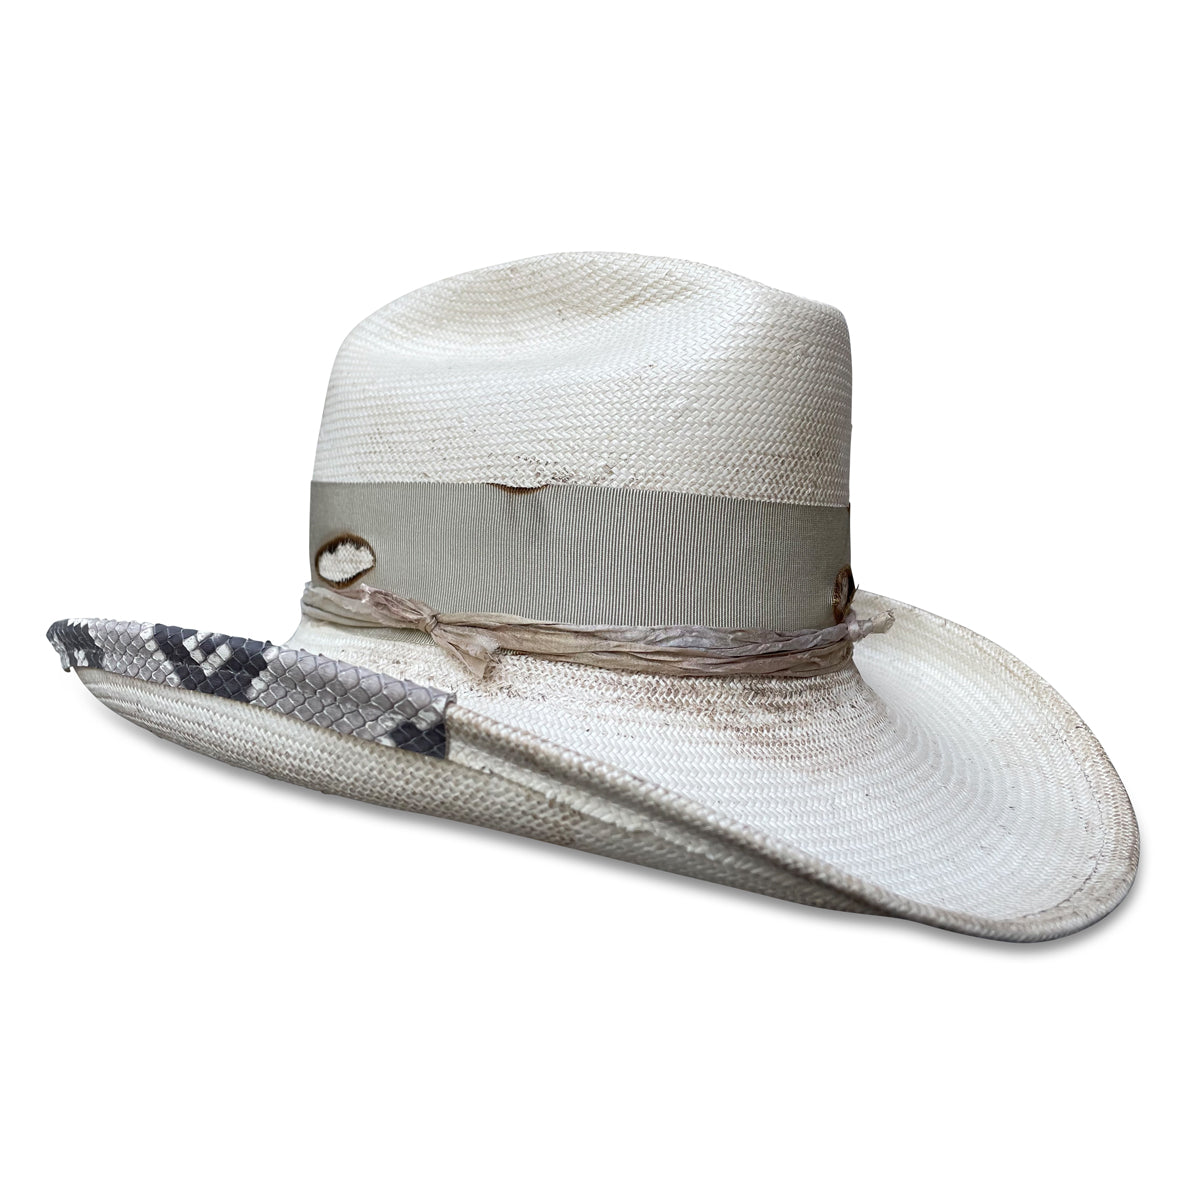 La Petite Chatte cowboy hat featuring sun-protective straw, a weathered look, and unique snakeskin detailing